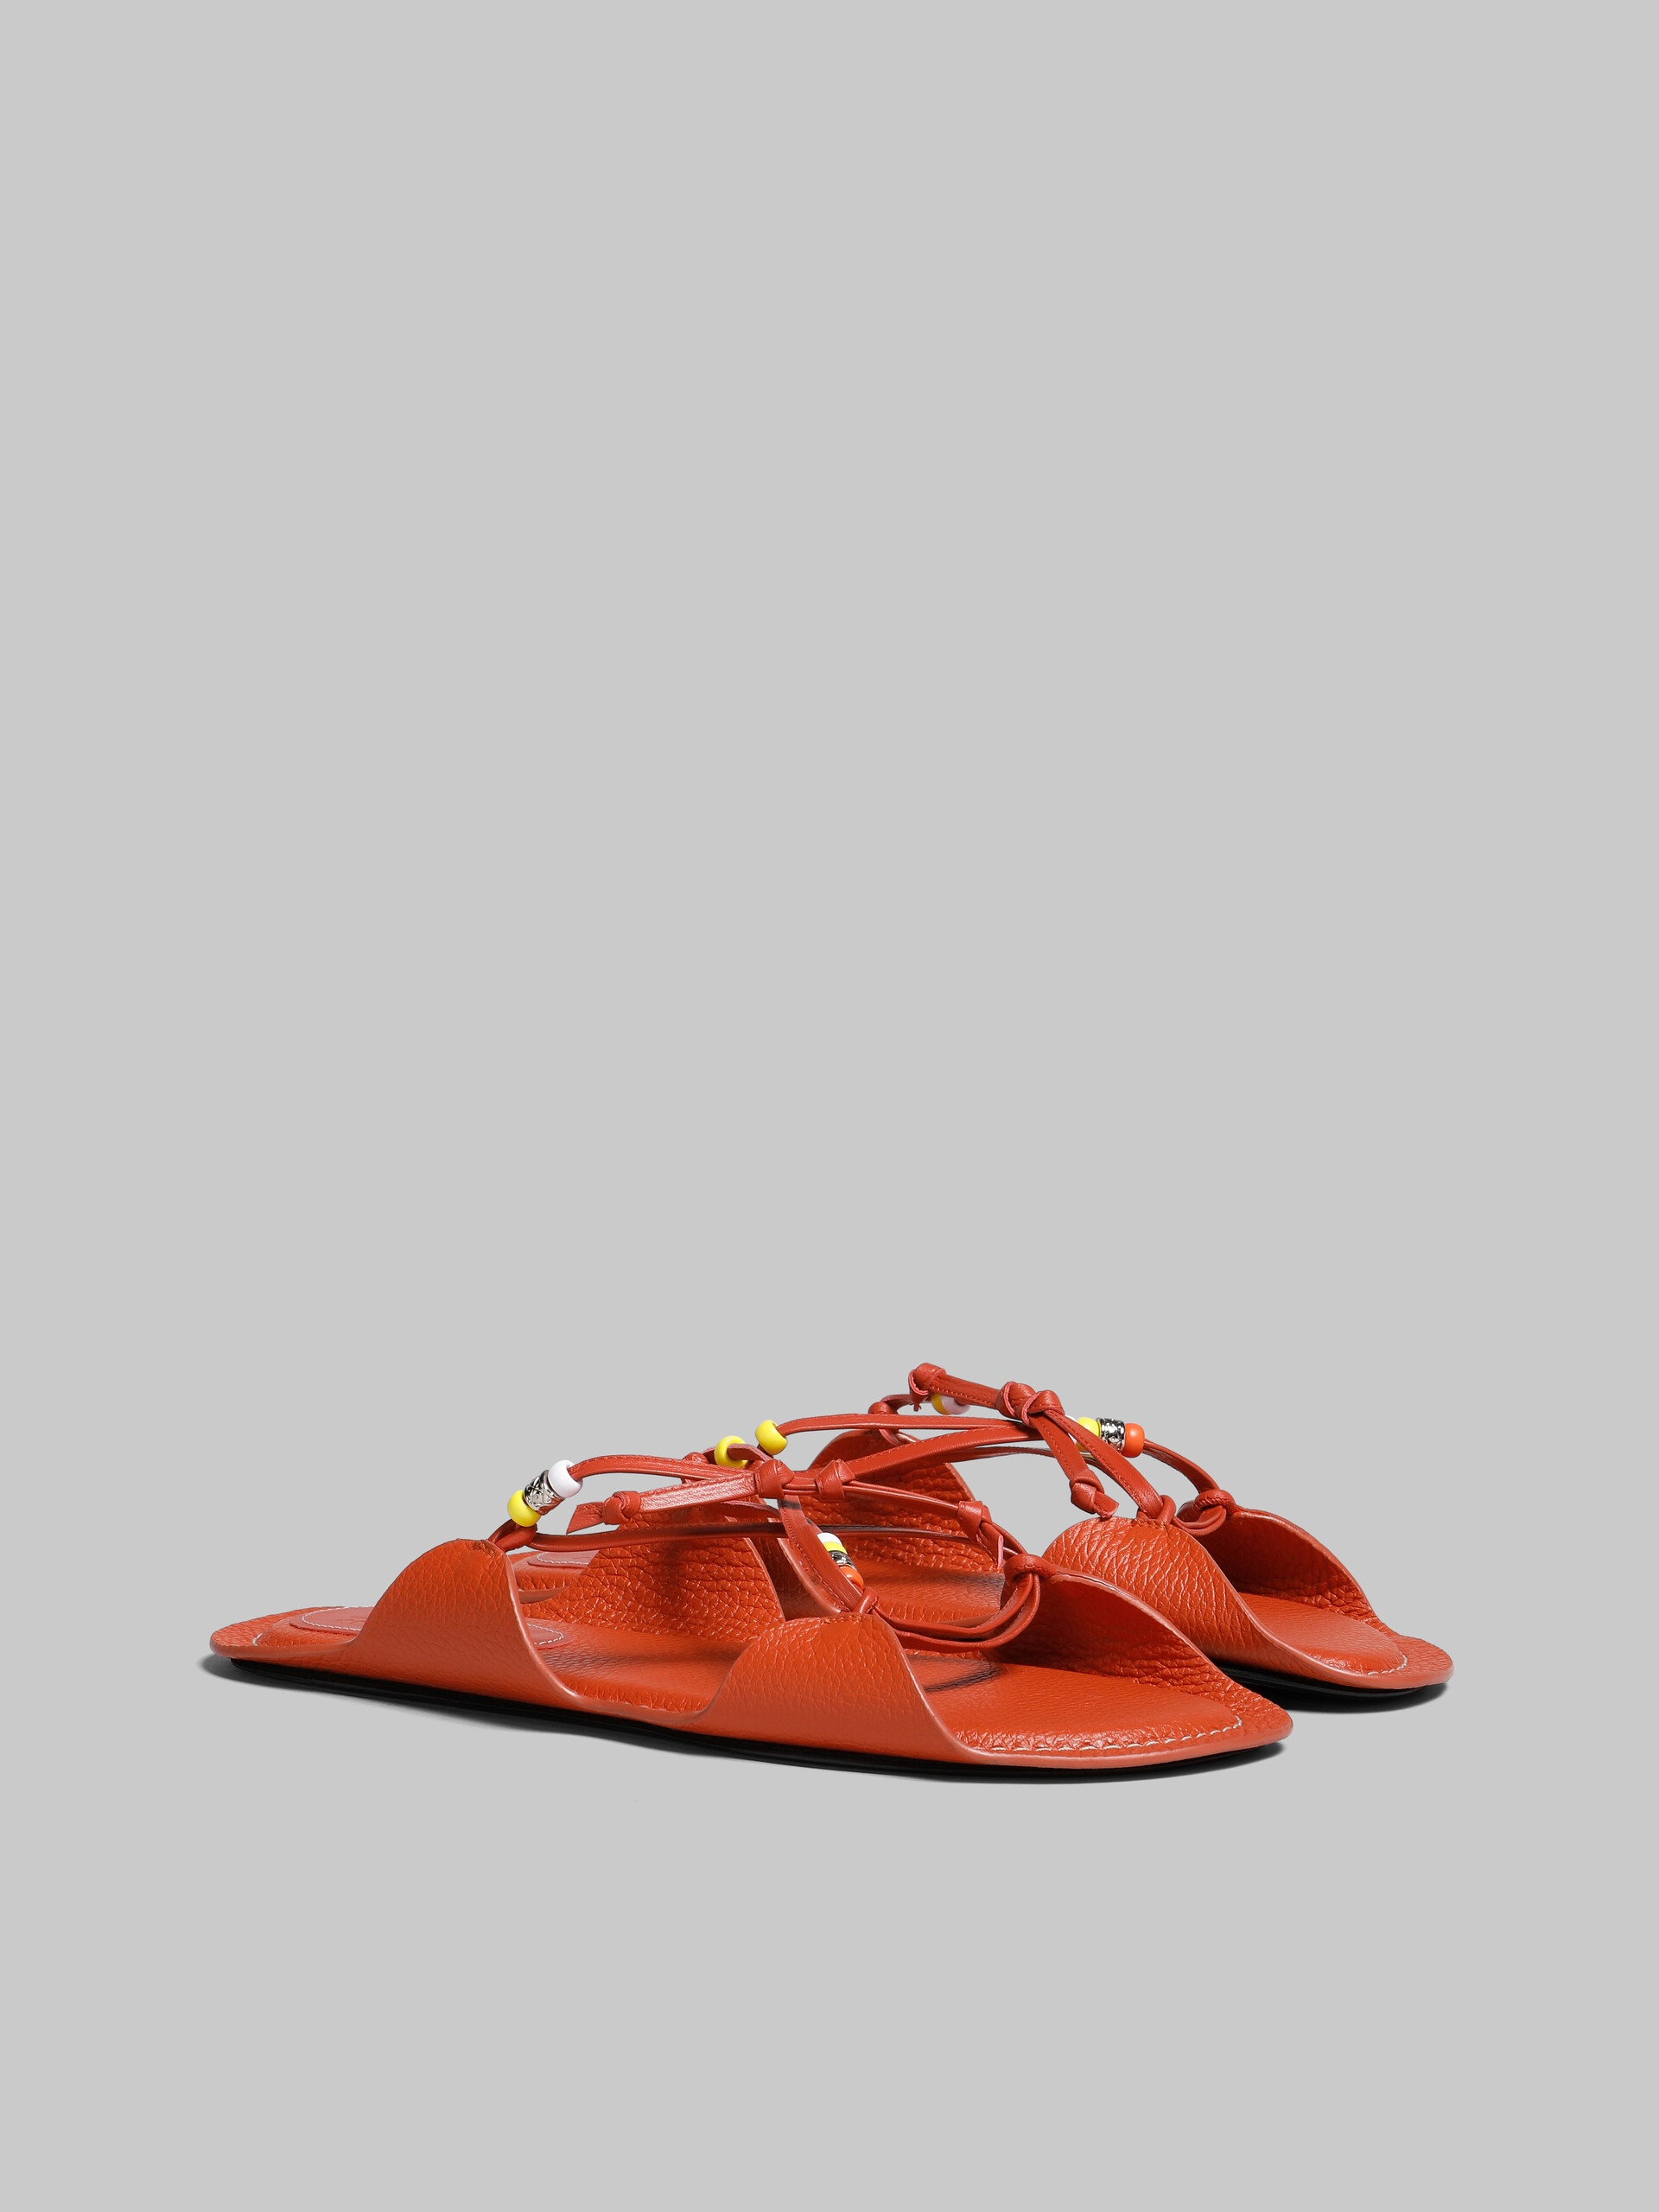 MARNI X NO VACANCY INN - BRICK RED LEATHER SANDALS WITH BEADS - 2